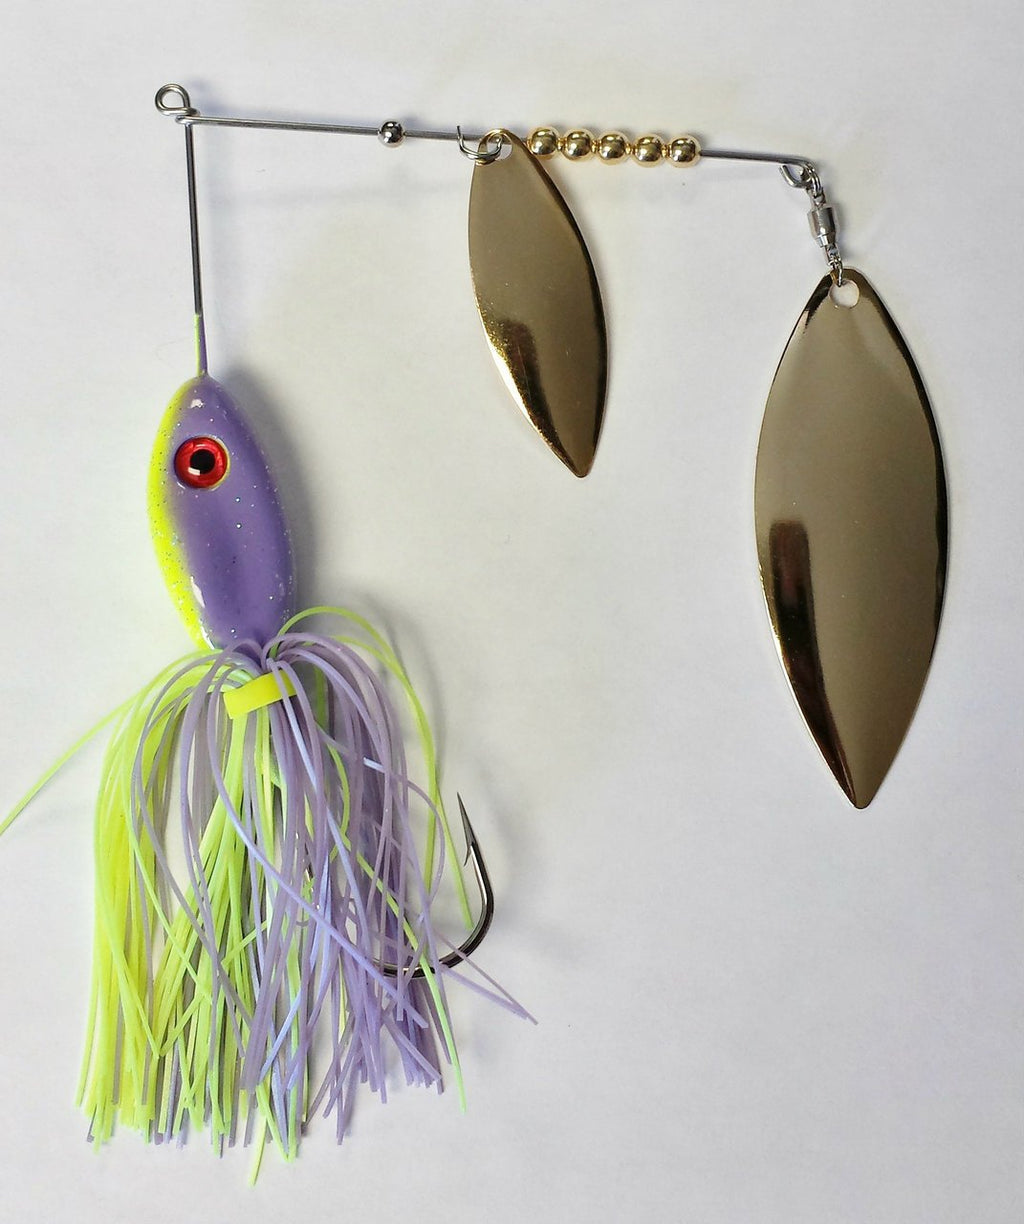 Purple-Chartreuse/Gold Spinnerbaits